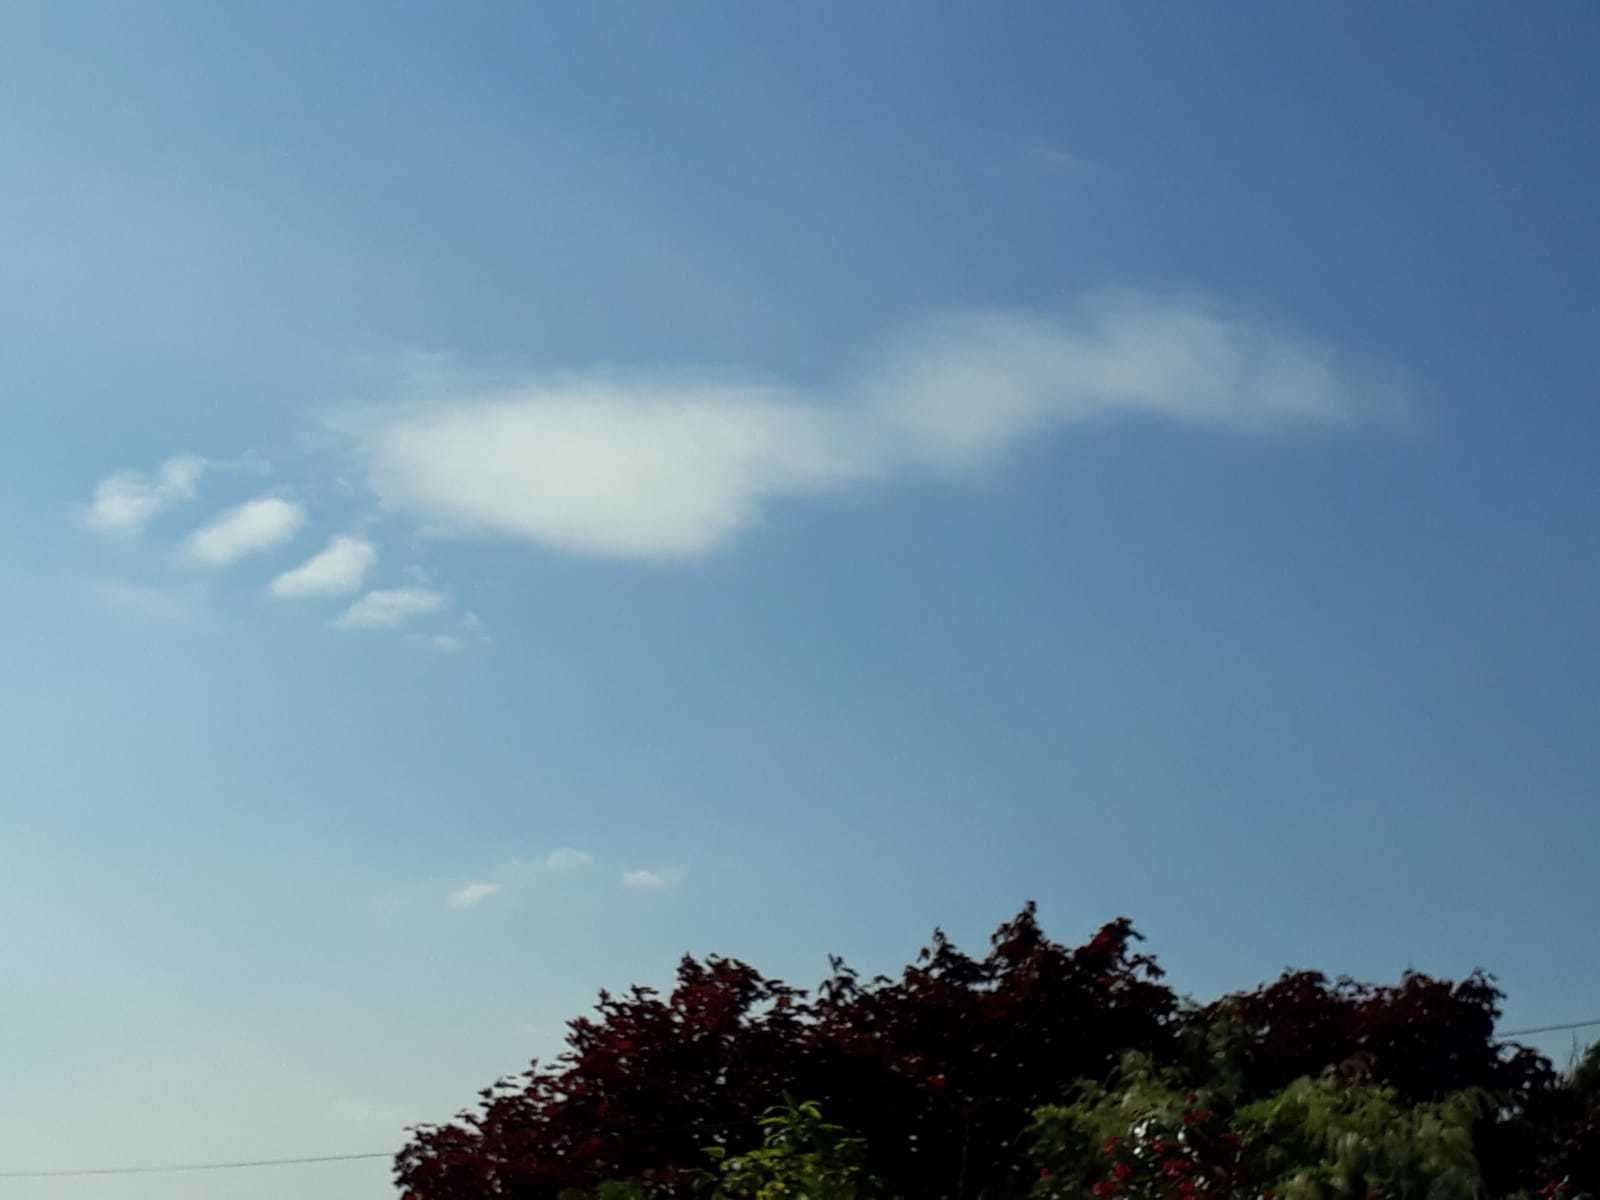 Does this cloud resemble a footprint? (11505591)